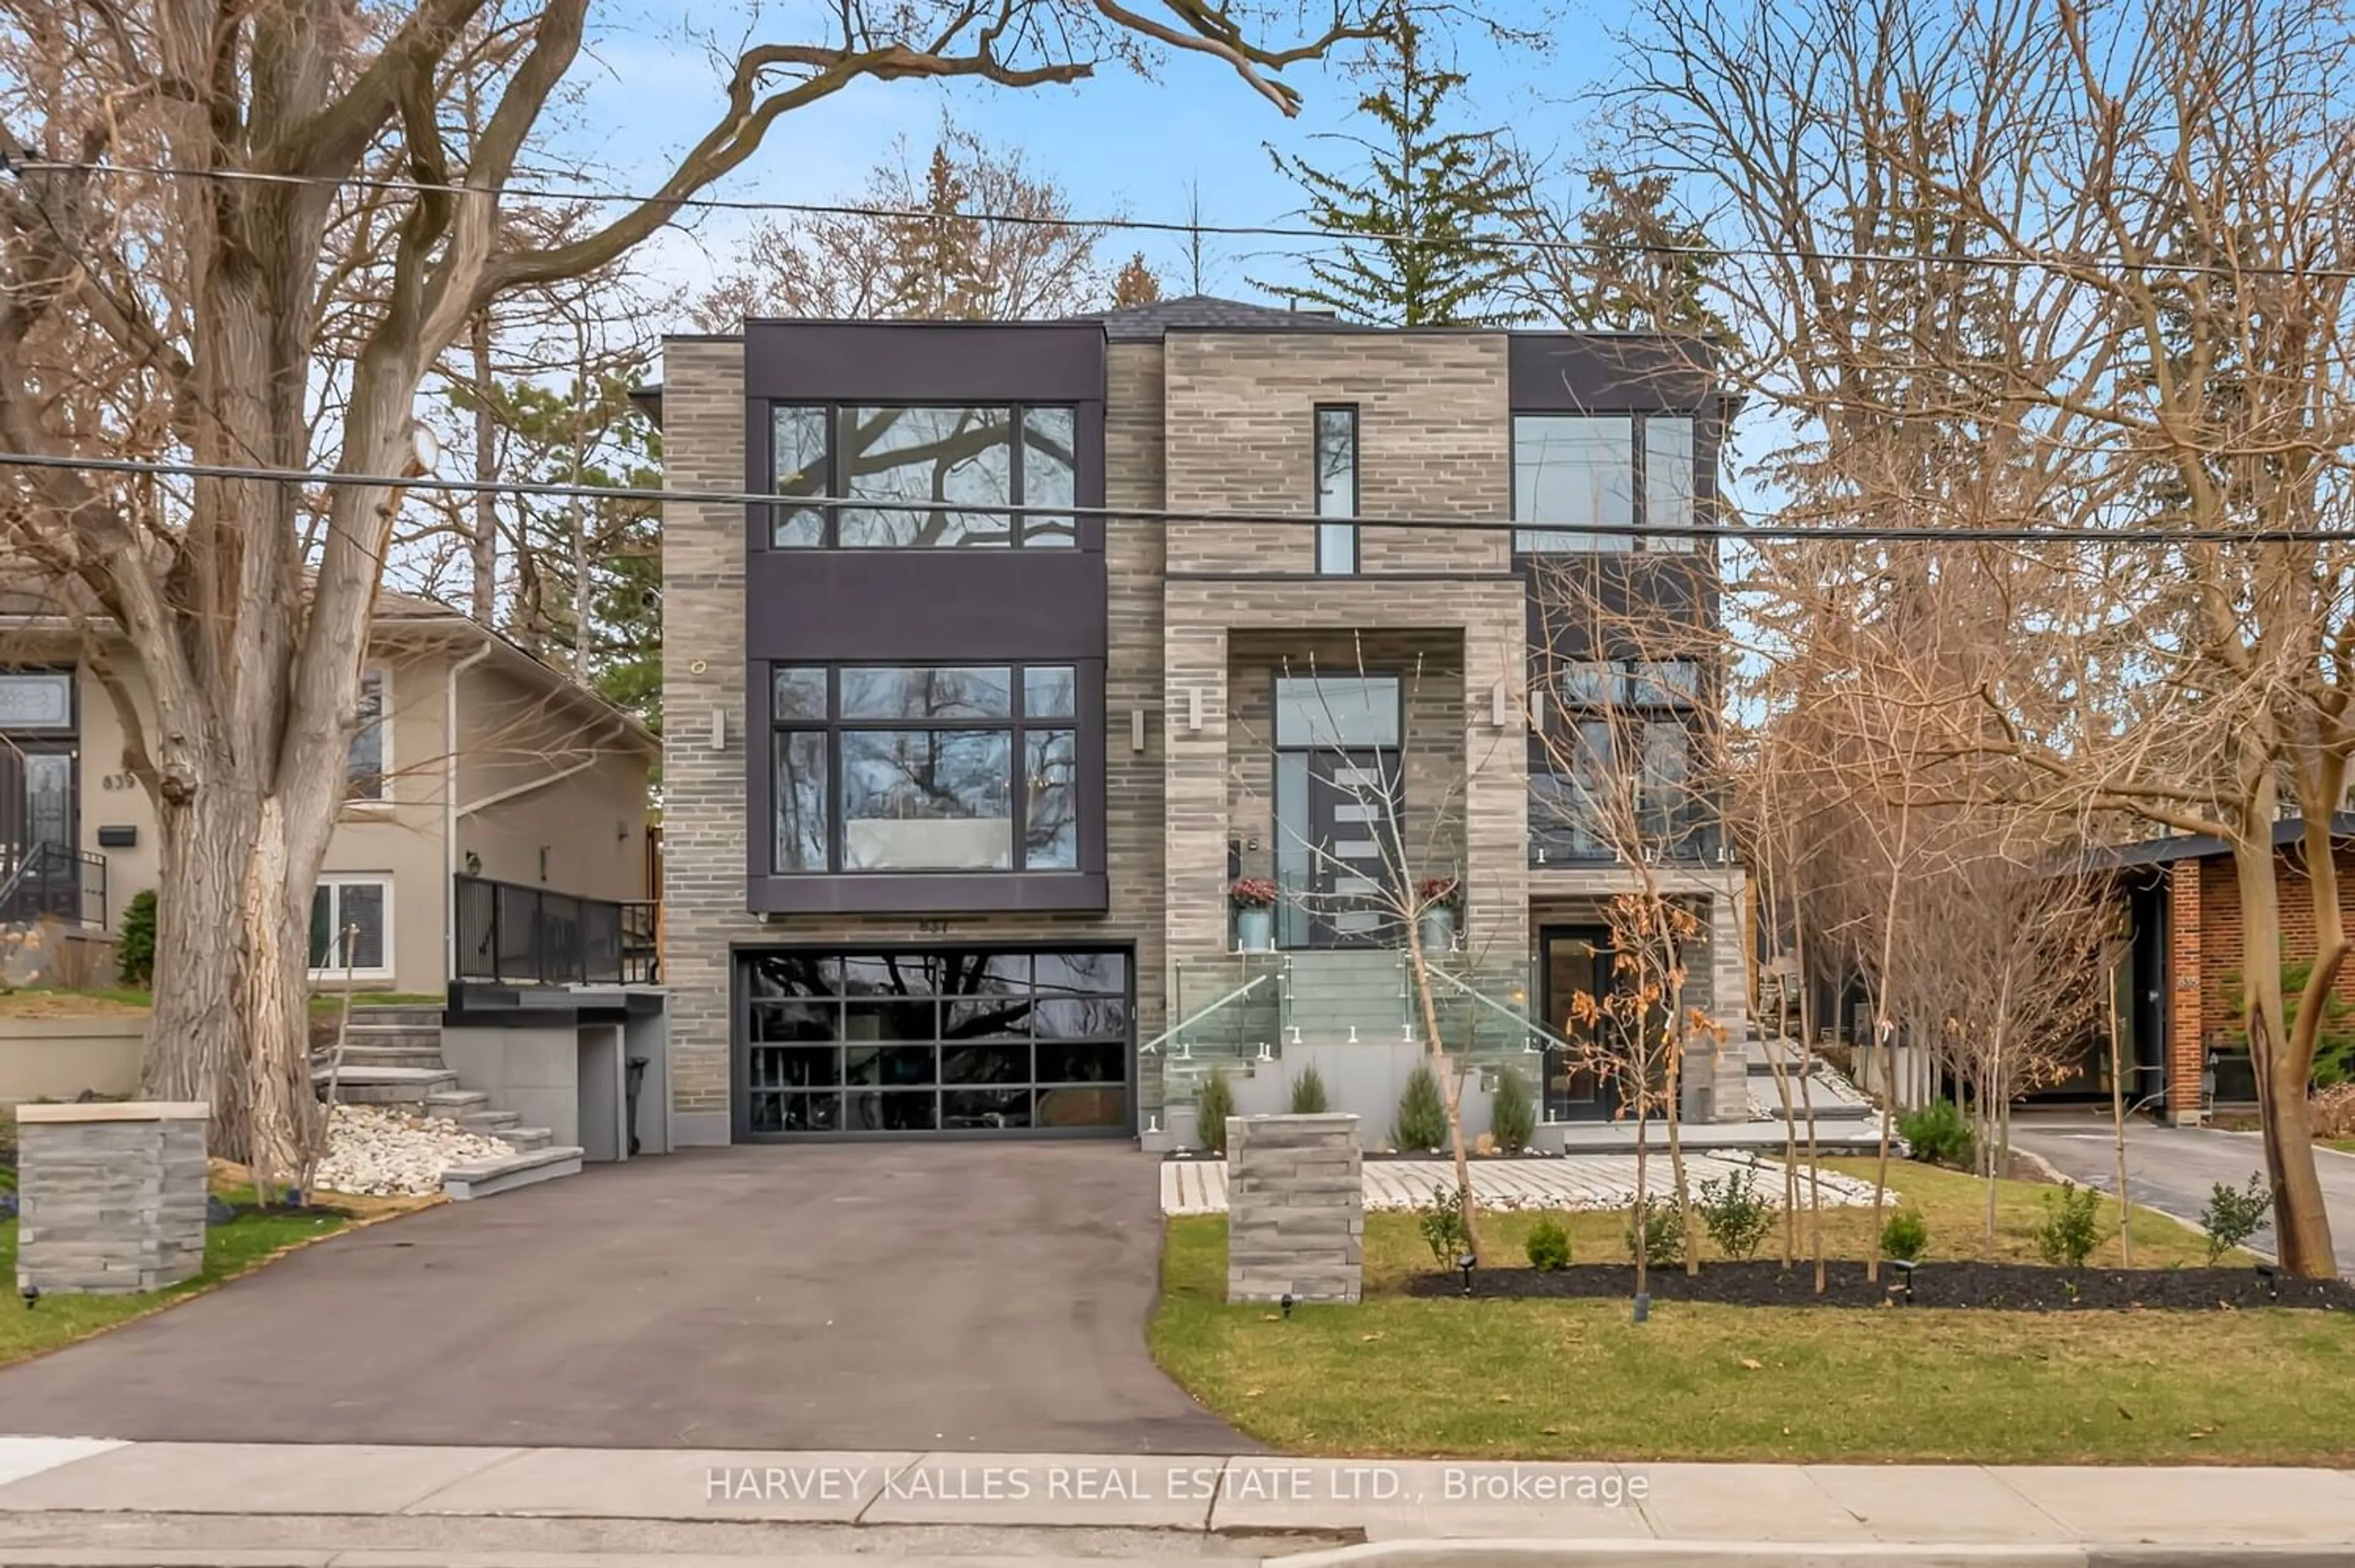 Home with brick exterior material for 837 Royal York Rd, Toronto Ontario M9Y 2V1